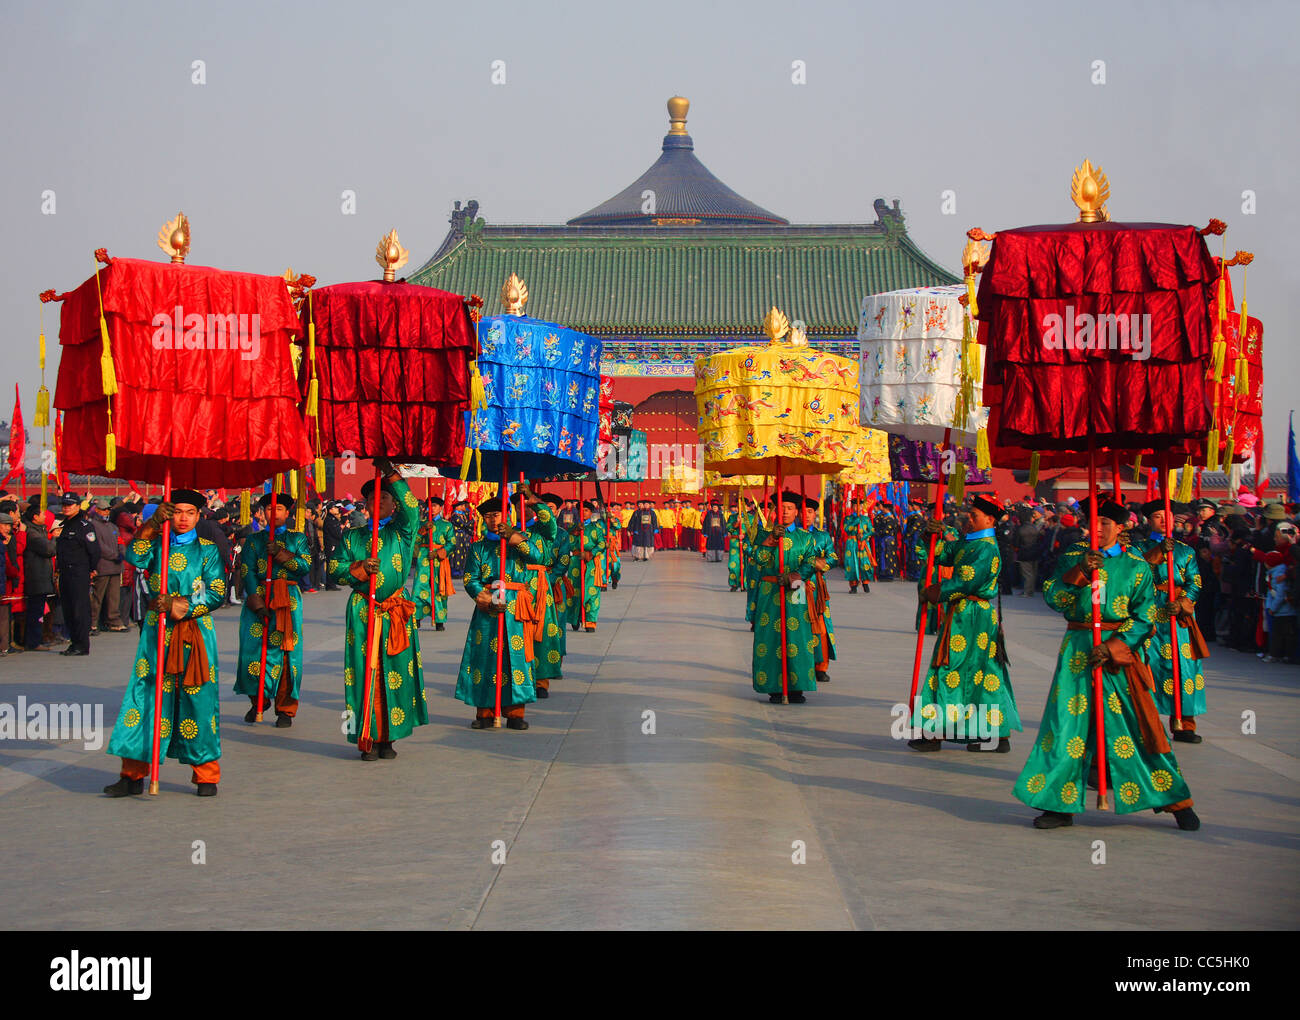 Worshipping Heaven Ceremony at Temple of Heaven, Beijing, China Stock Photo